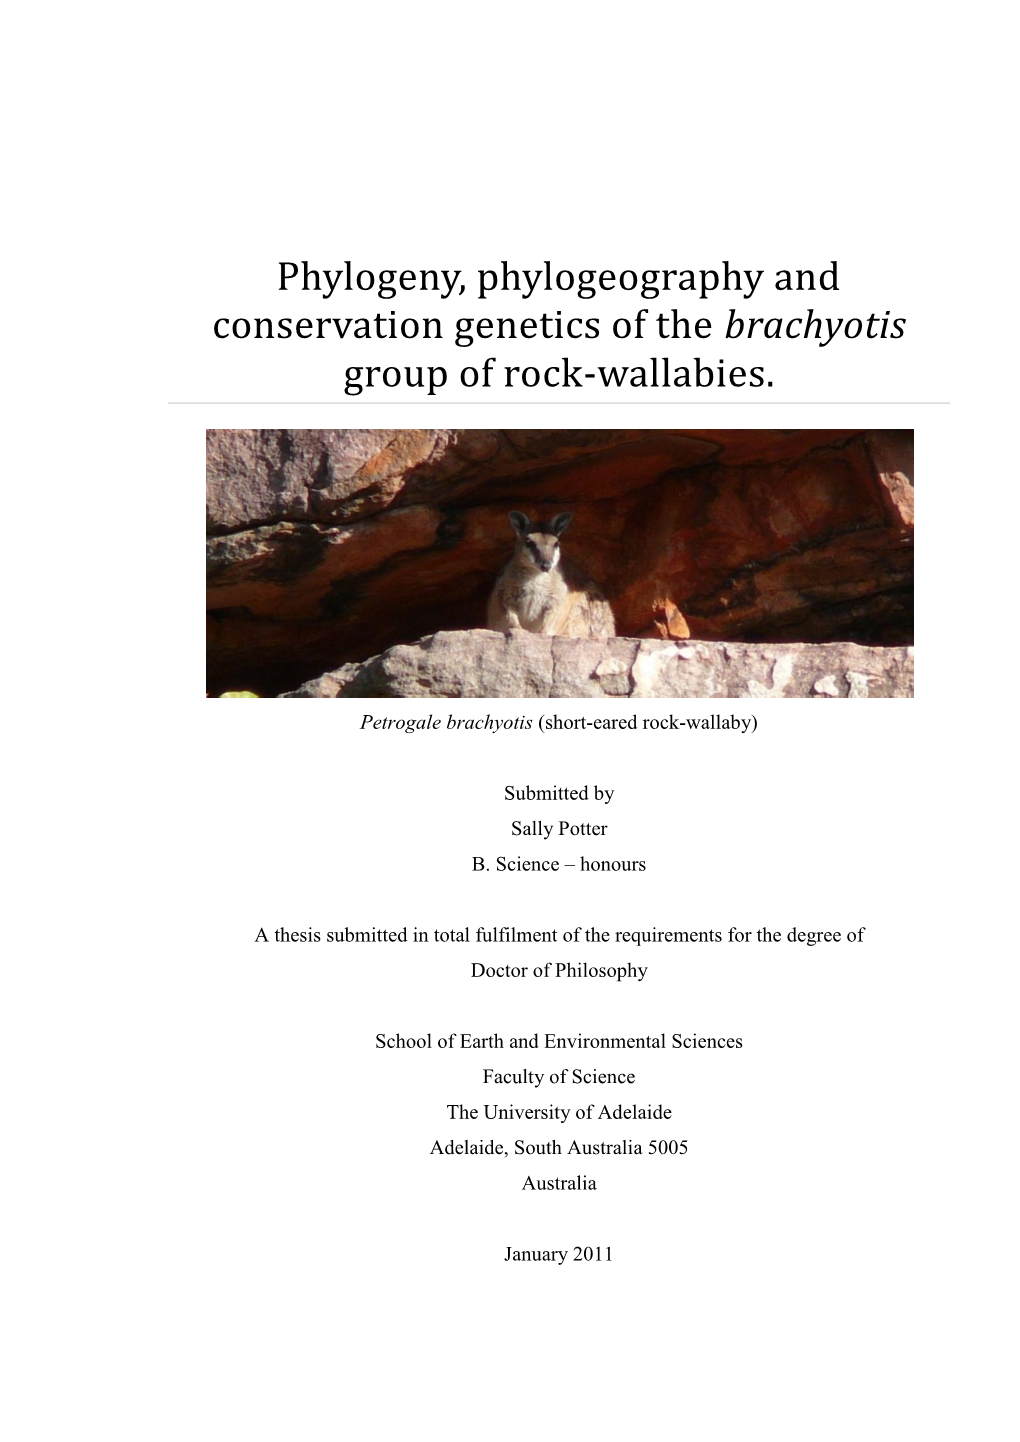 Phylogeny, Phylogeography and Conservation Genetics of the Brachyotis Group of Rock-Wallabies